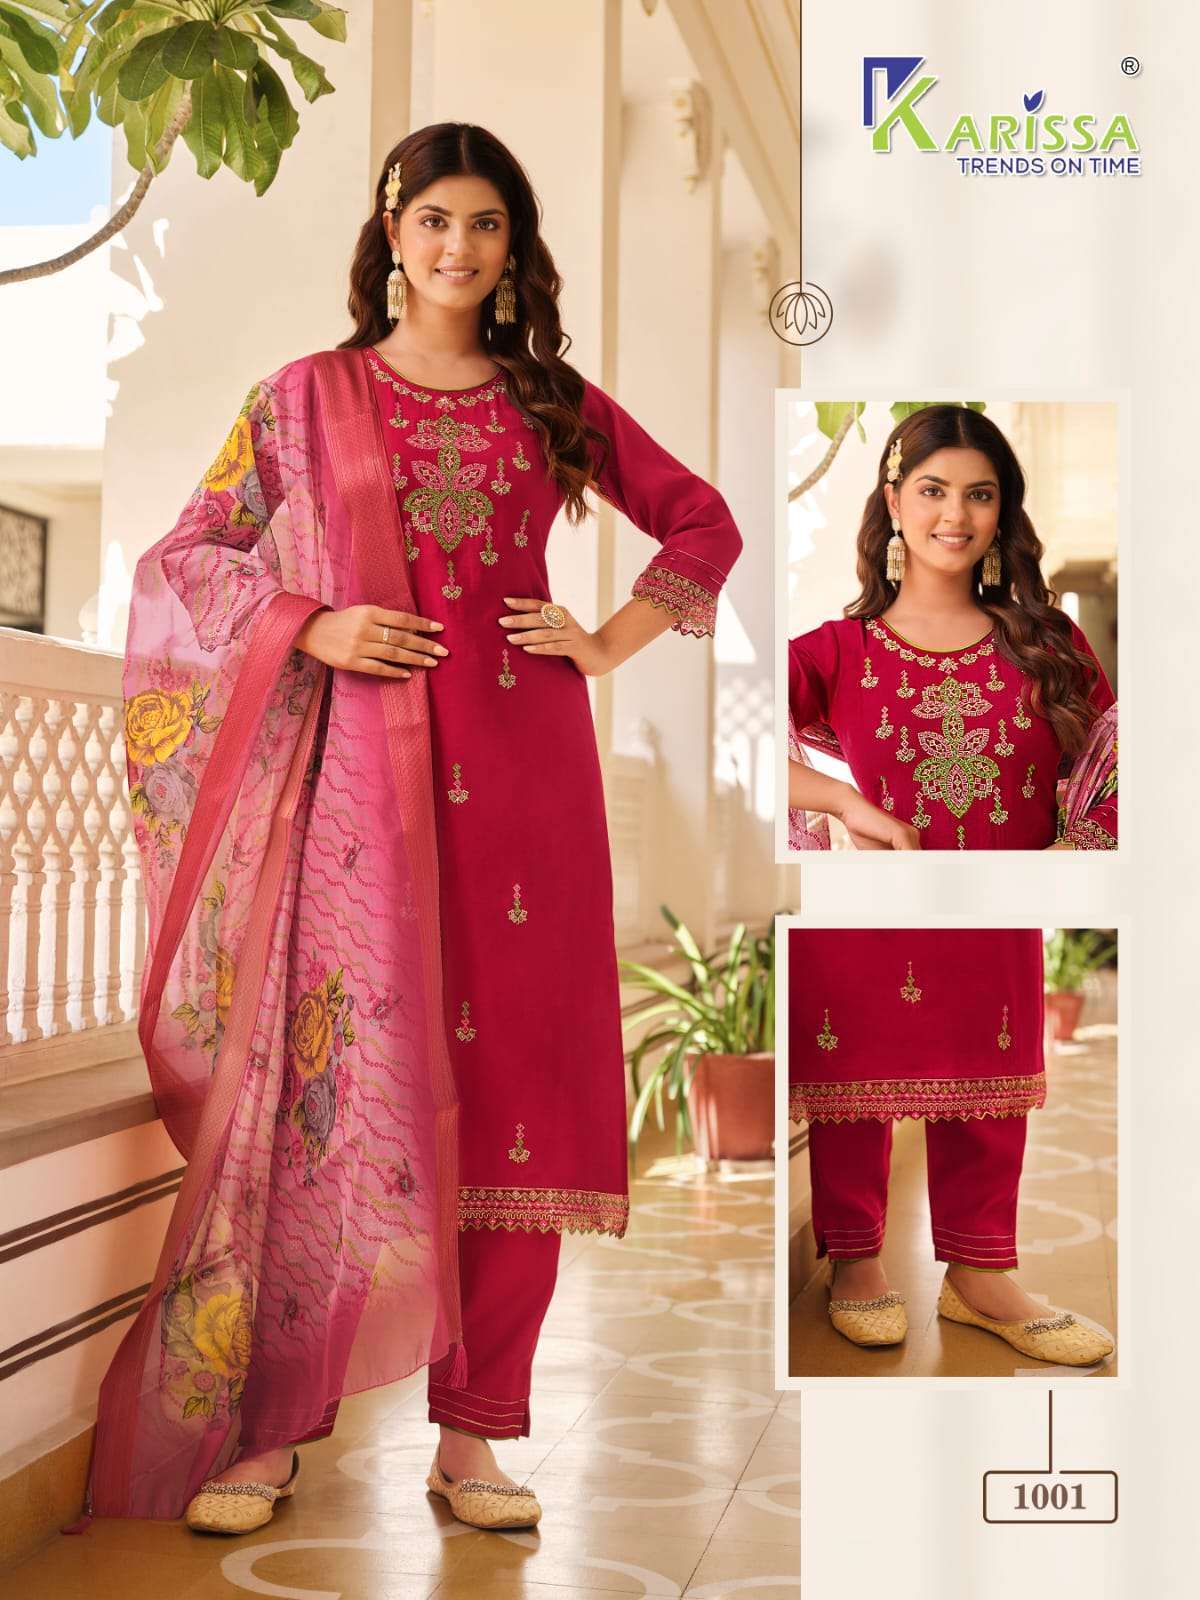 10 red bridal kurtas to add to your wedding trousseau | Vogue India